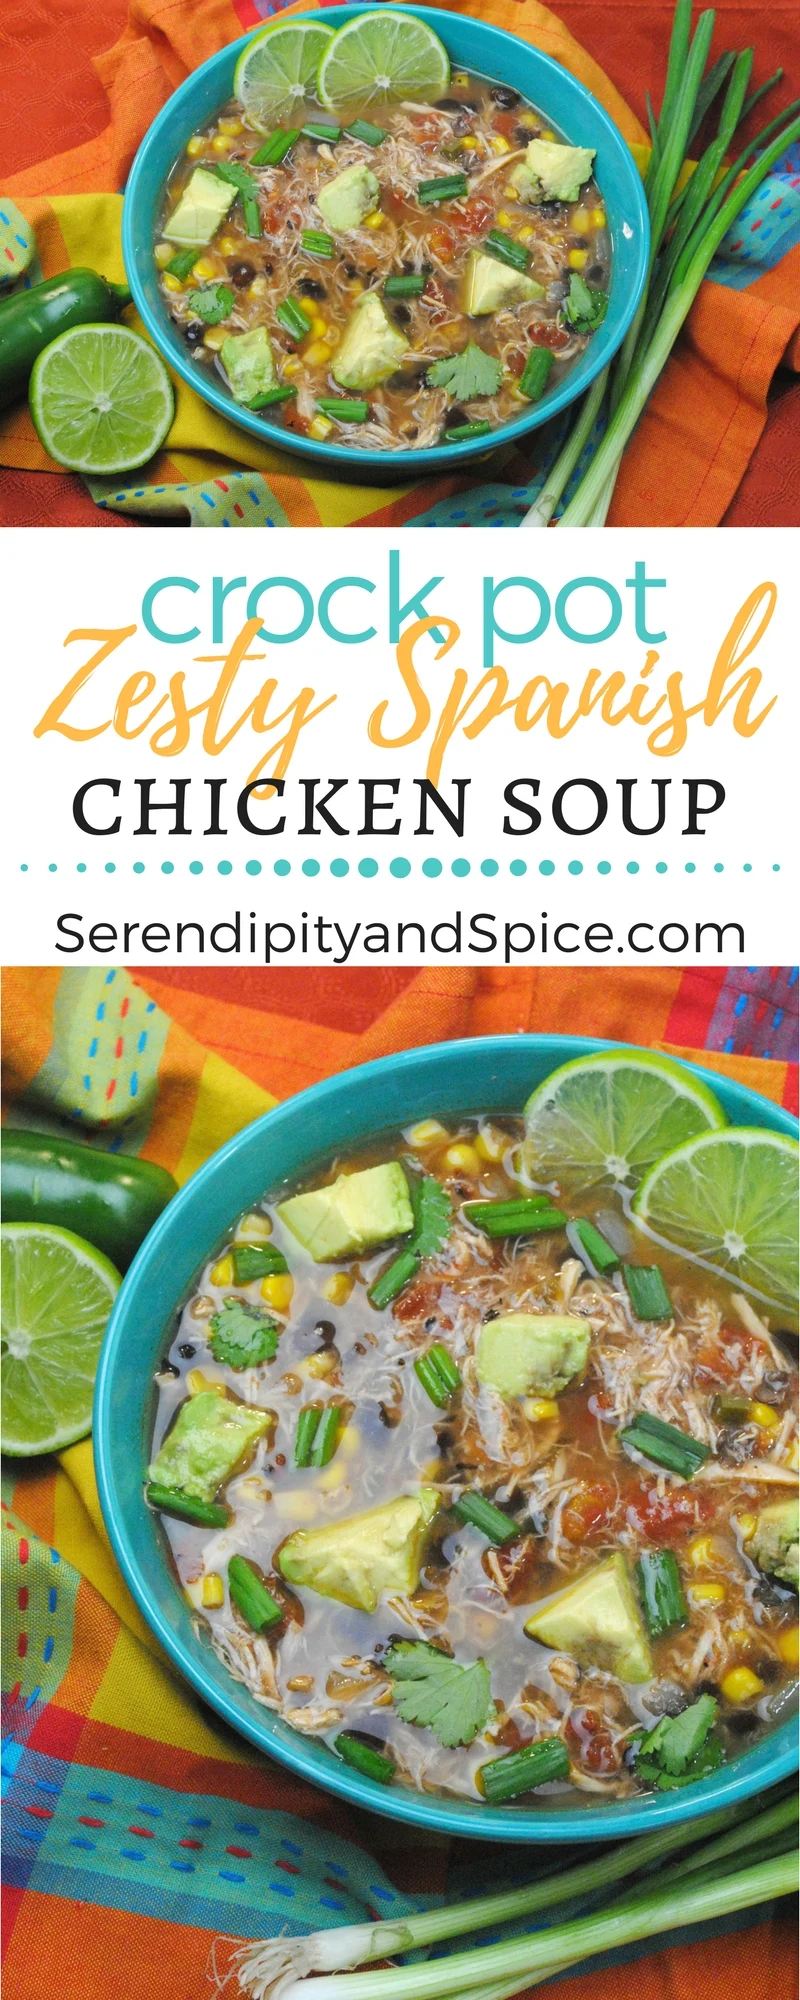 Spanish Slow Cooker Chicken Soup - Serendipity And Spice